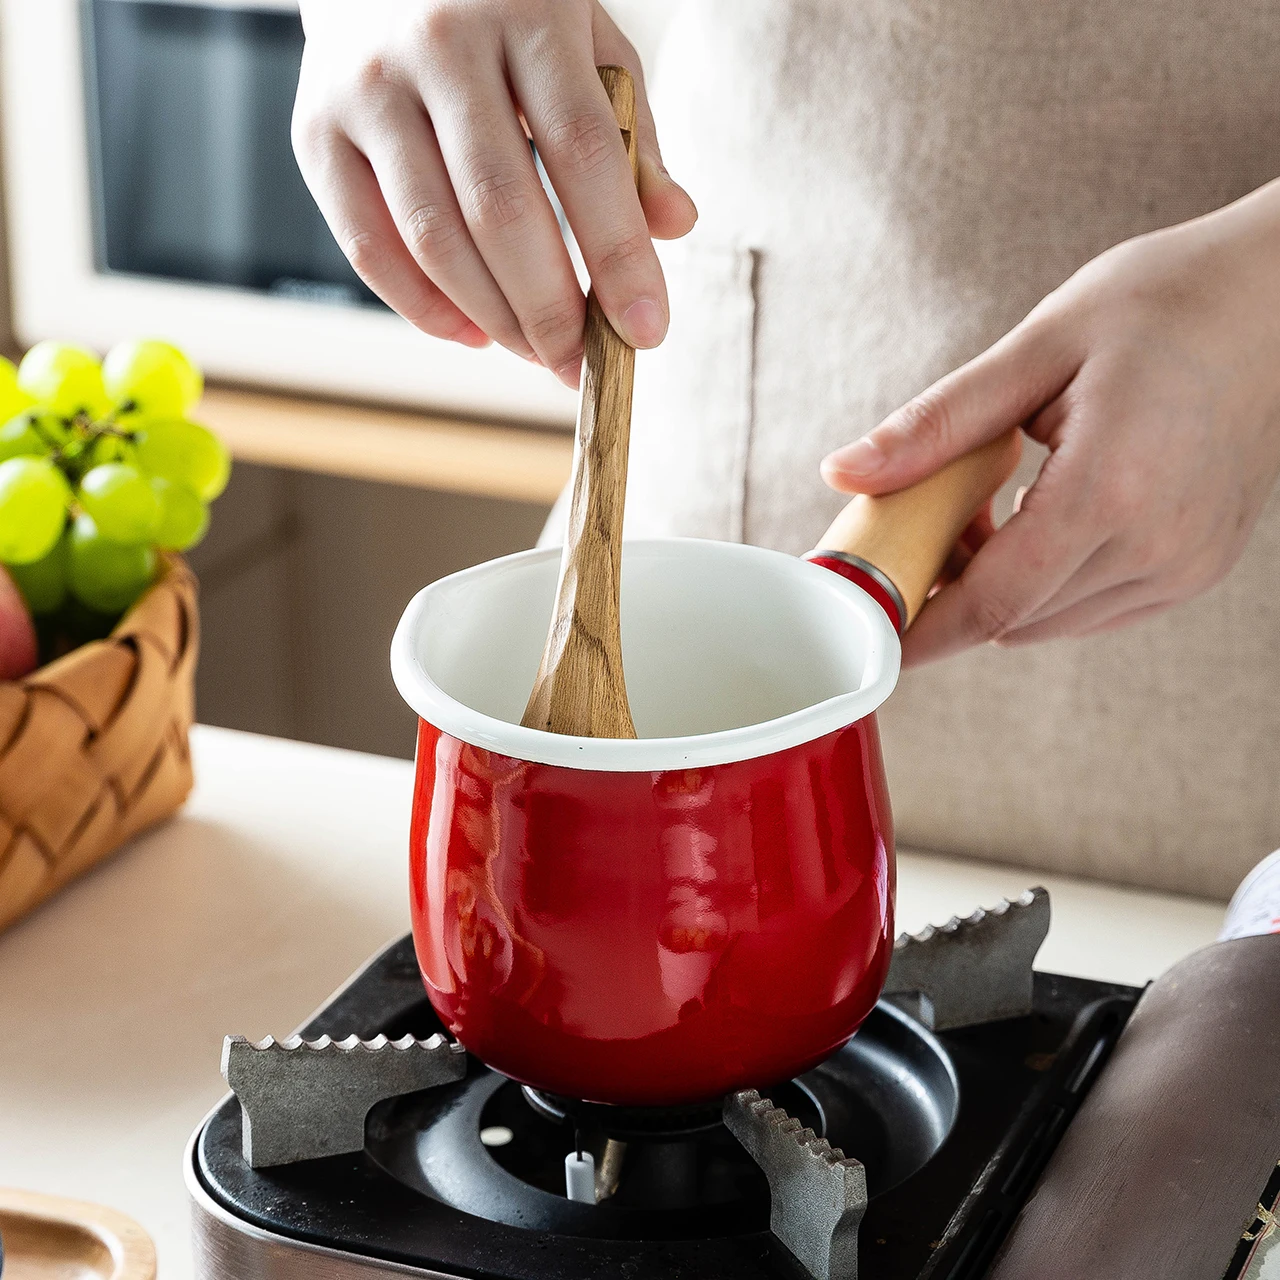 500ml Enamel Coffee Milk Pot With Wooden Handle Saucepan Cookware For Oatmeal Butter Cooking Pan Non Stick Gas Stove Induction